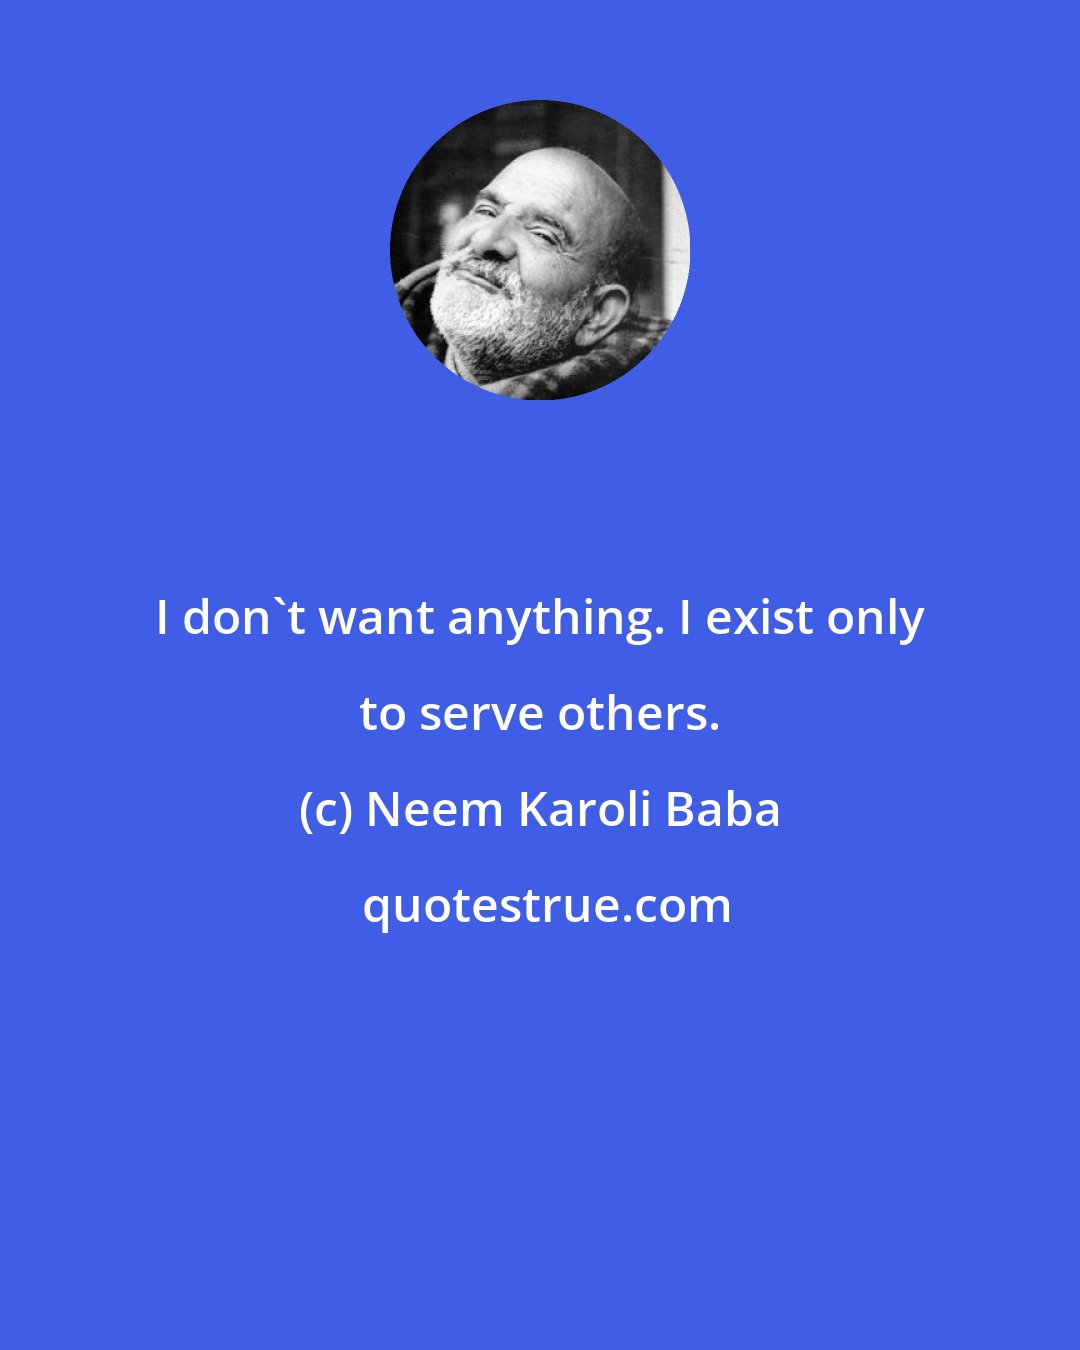 Neem Karoli Baba: I don't want anything. I exist only to serve others.